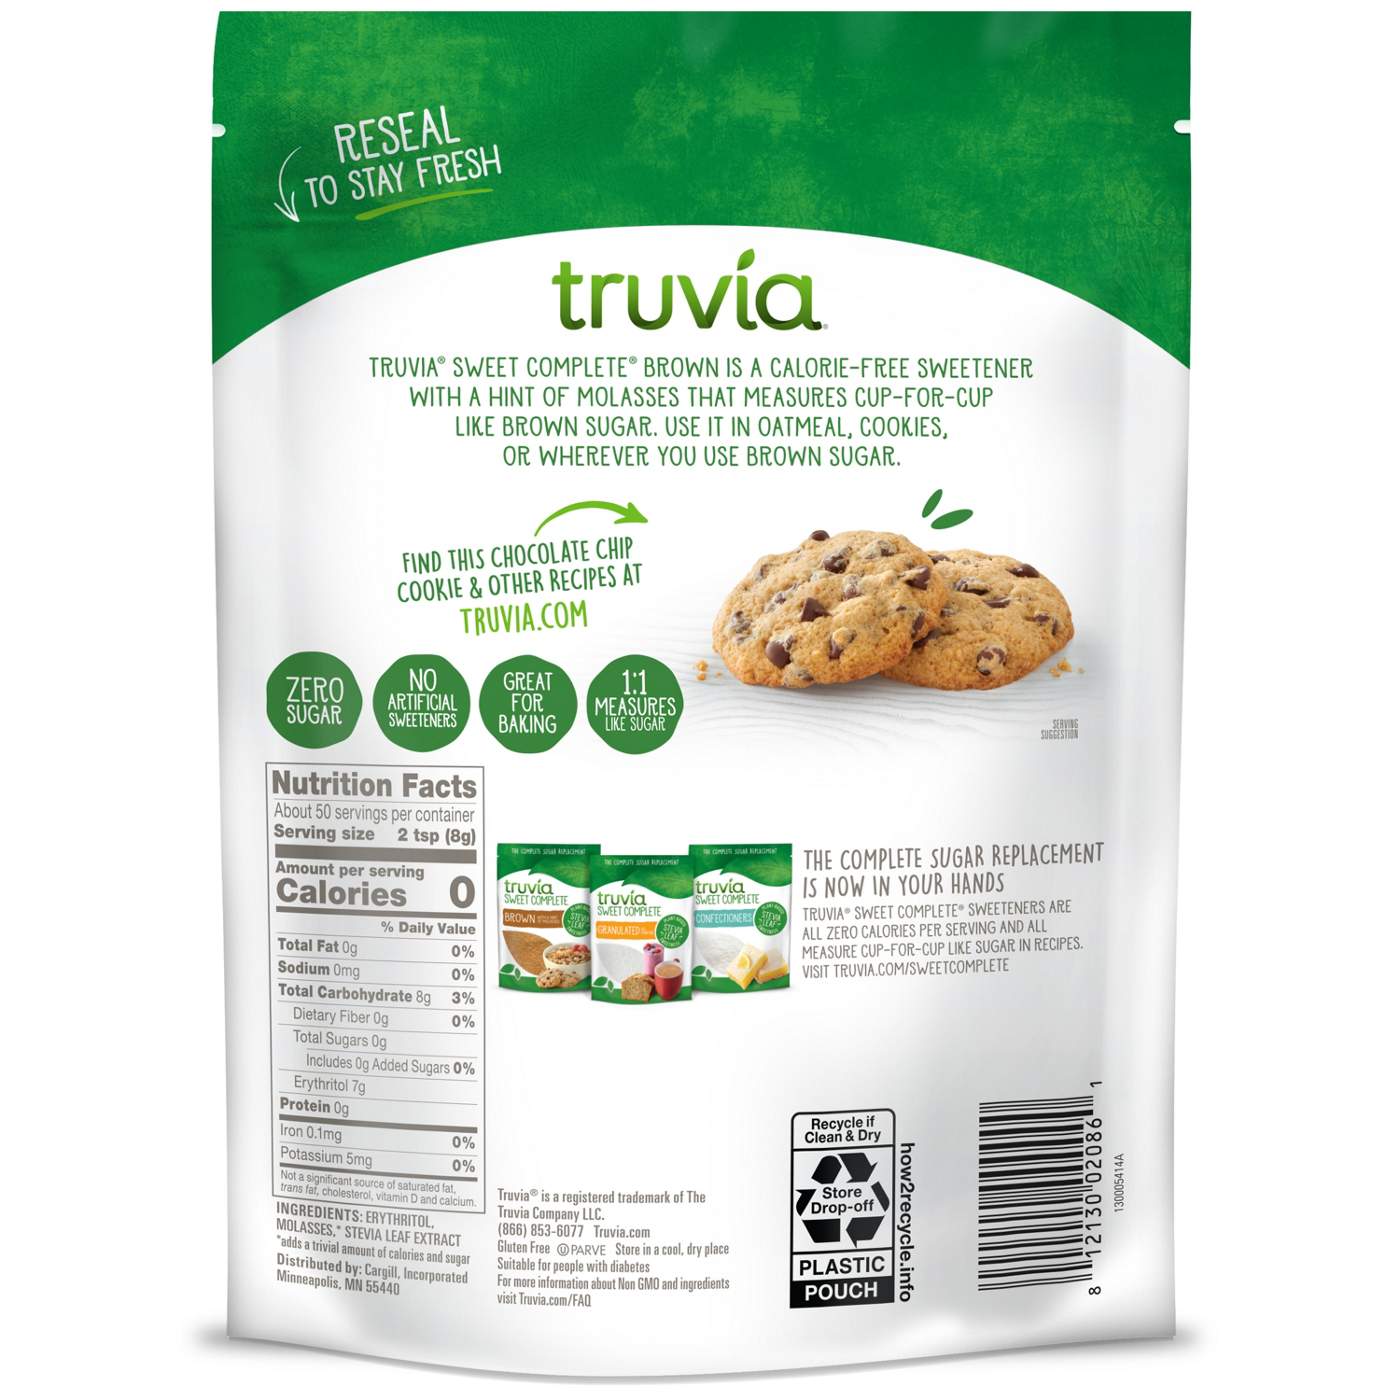 Truvia Sweet Complete Brown Calorie-Free Sweetener with Stevia Leaf Extract; image 2 of 5